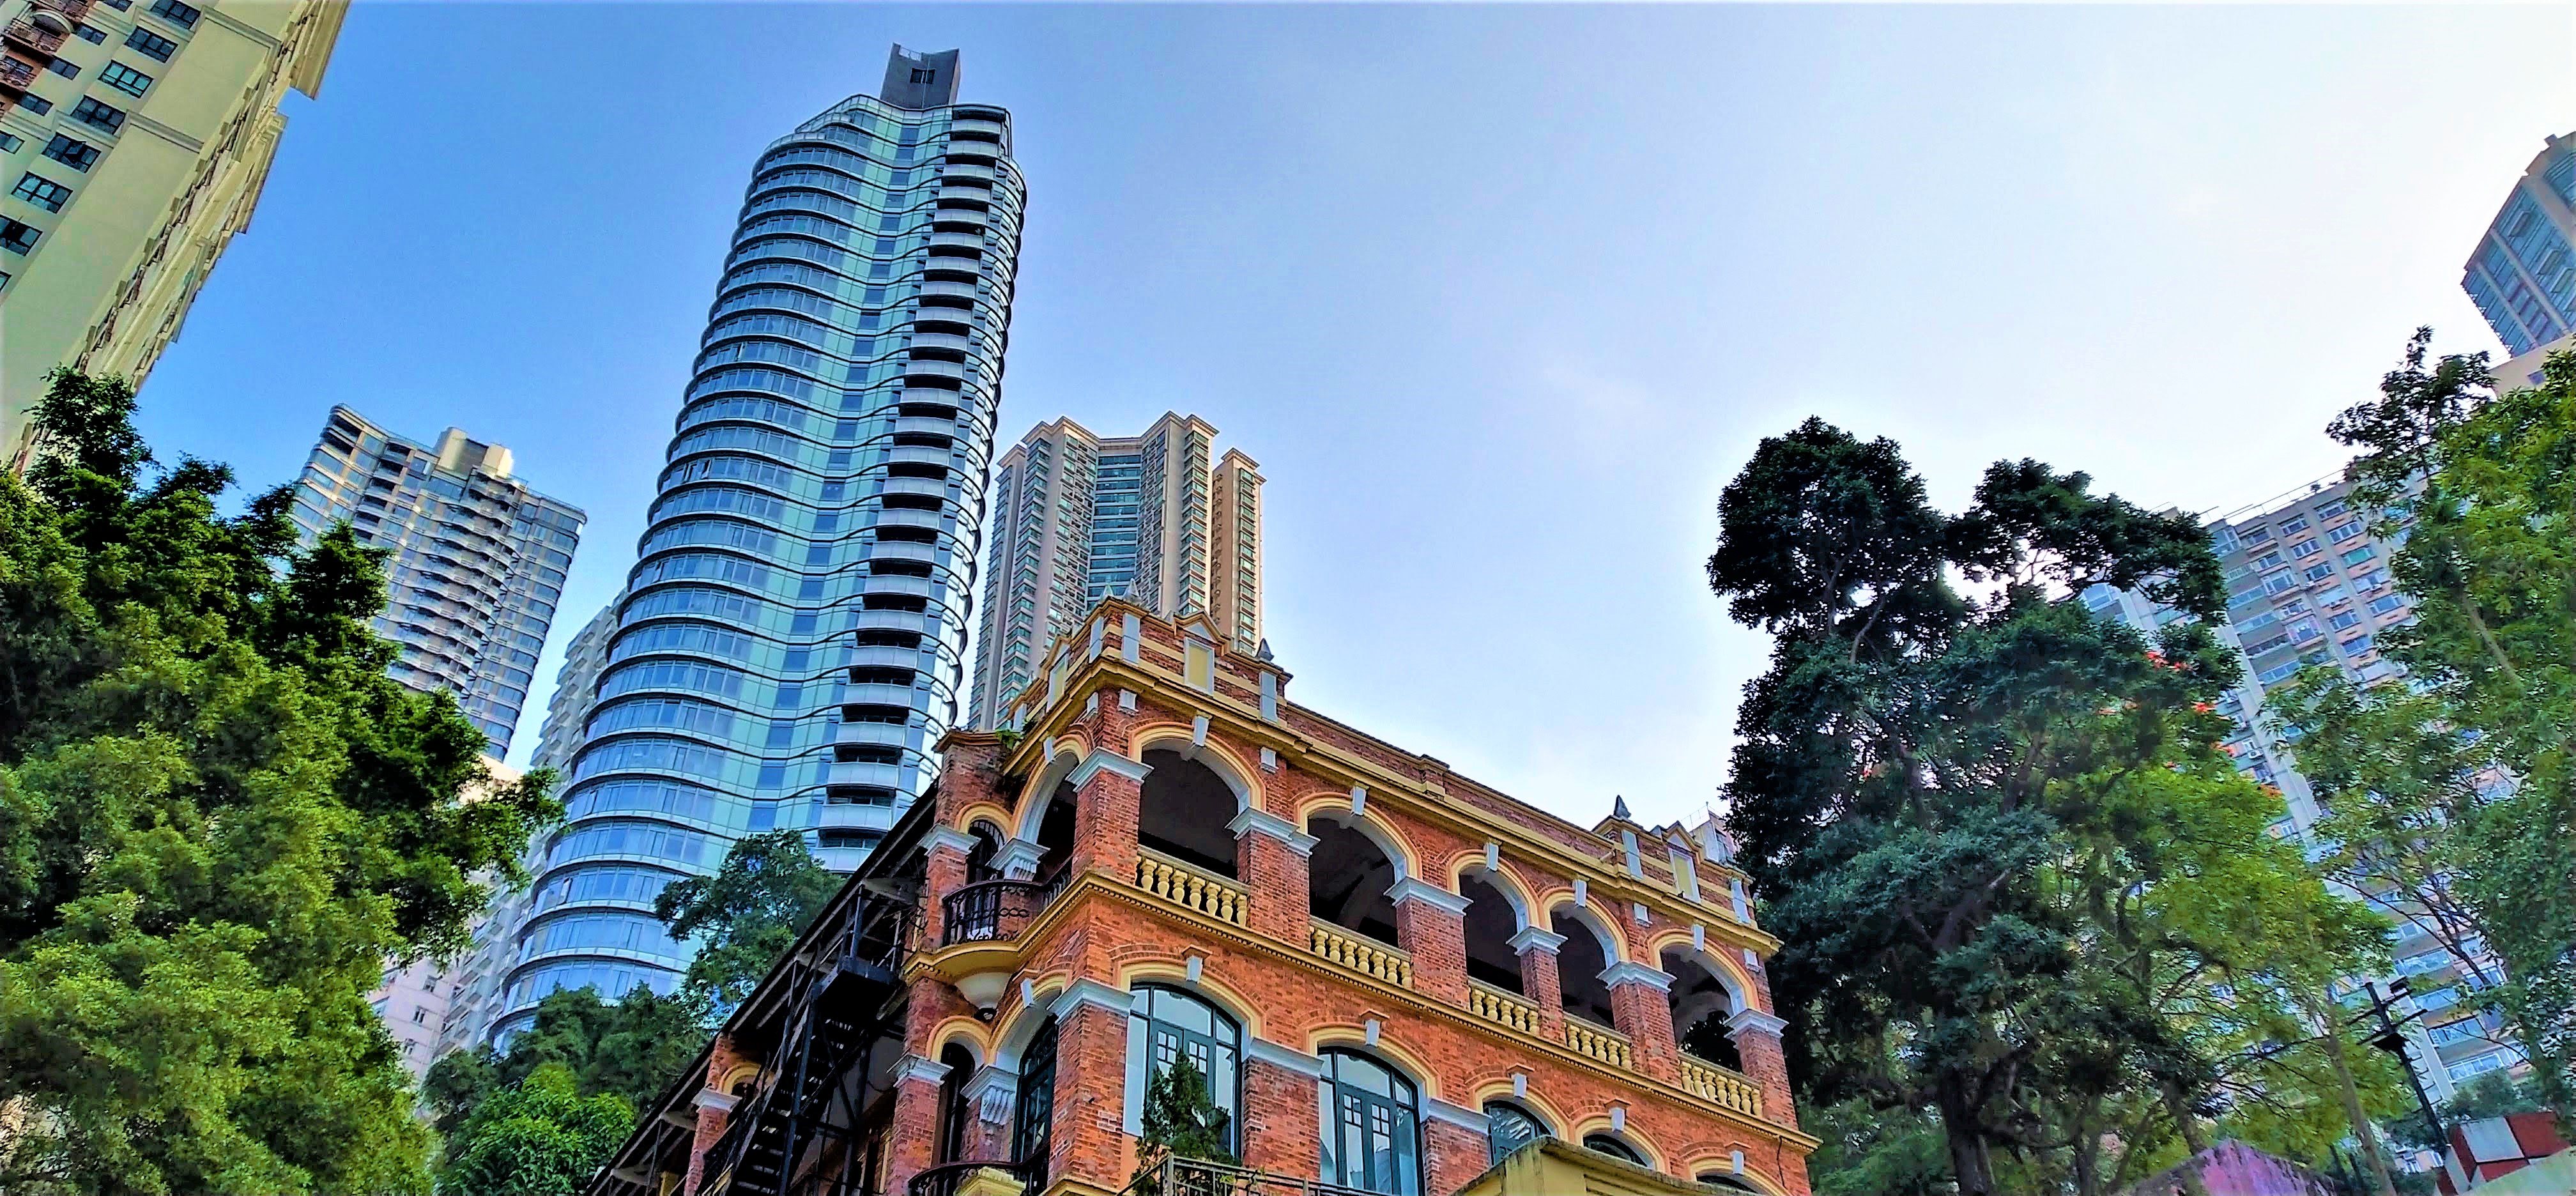 Heritage building Hong Kong Museum of Medical Science is now surrounded by the tall buildings